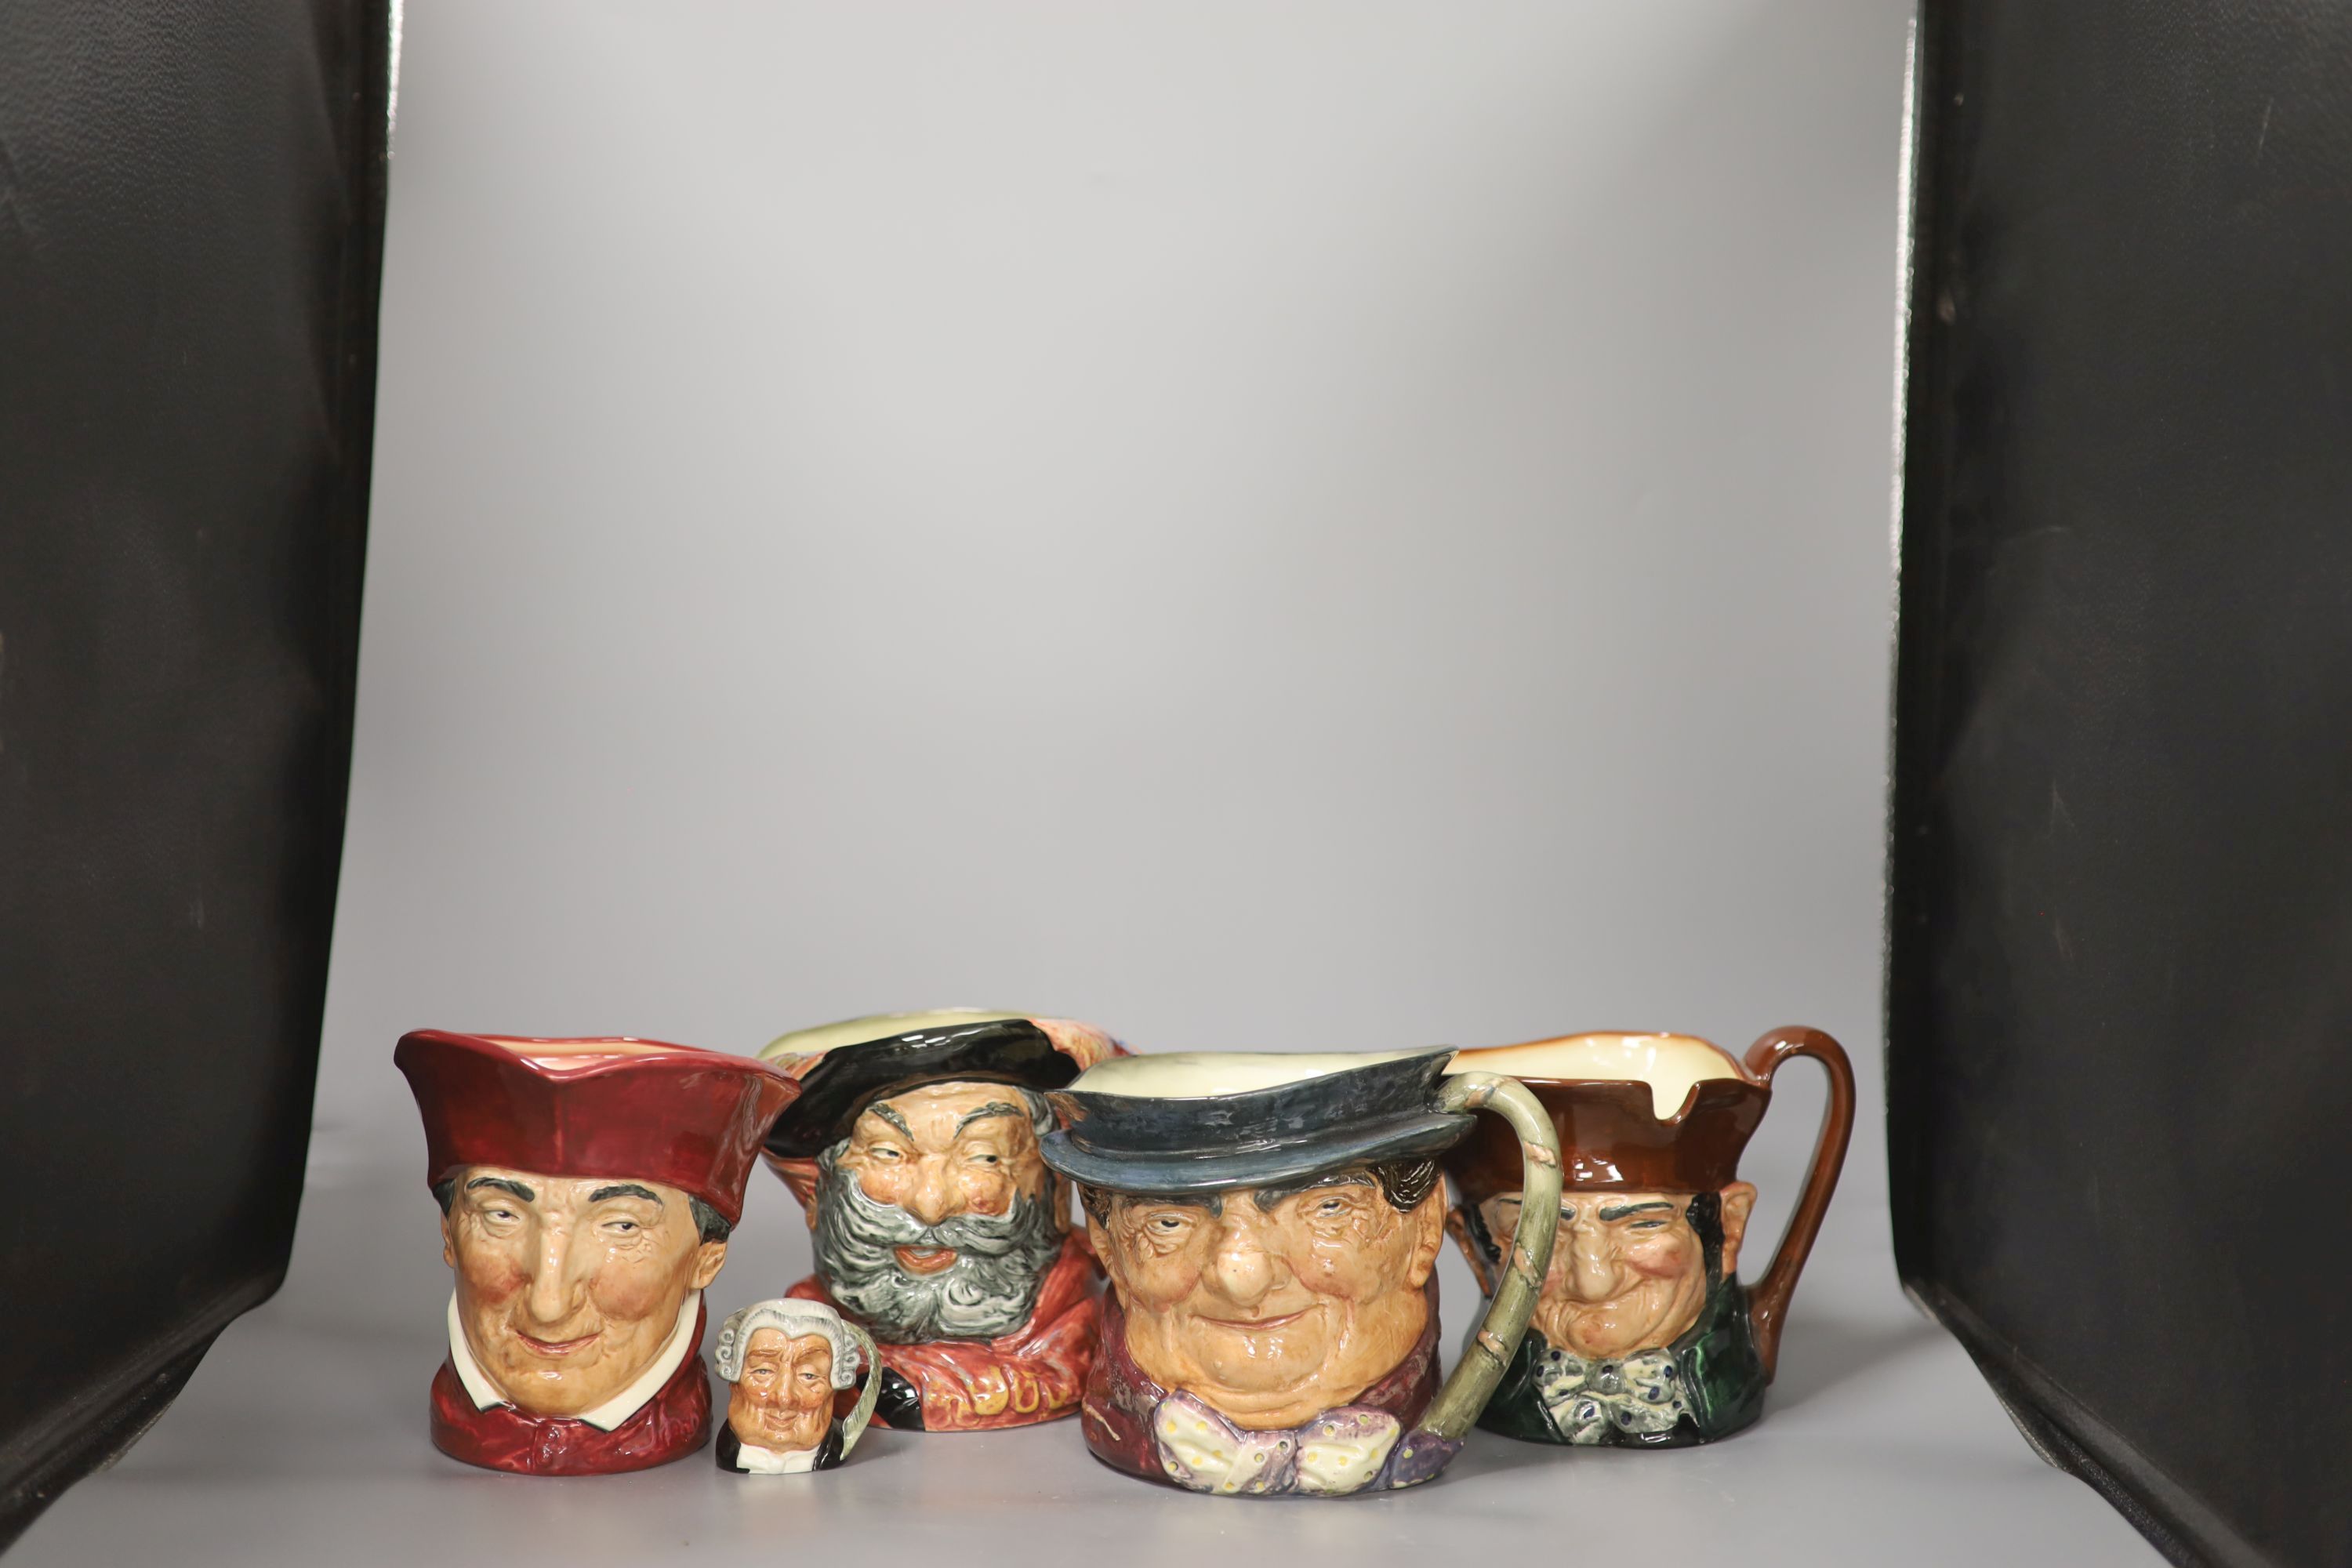 A group of four large Royal Doulton character jugs and one miniature character jug, including The Lawyer and Falstaff